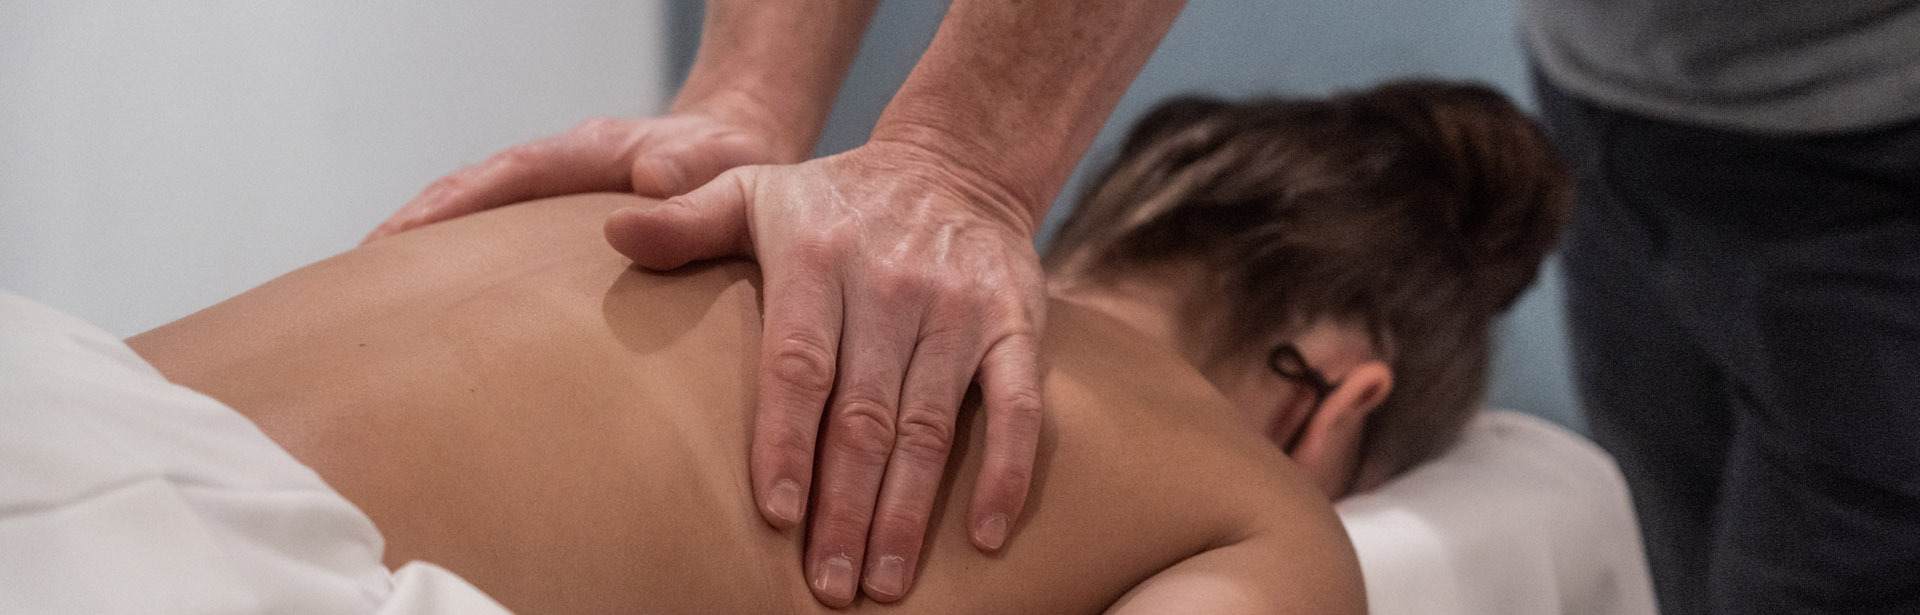 Massage Therapy for Back Pain Relief | Dundas University Health Clinic